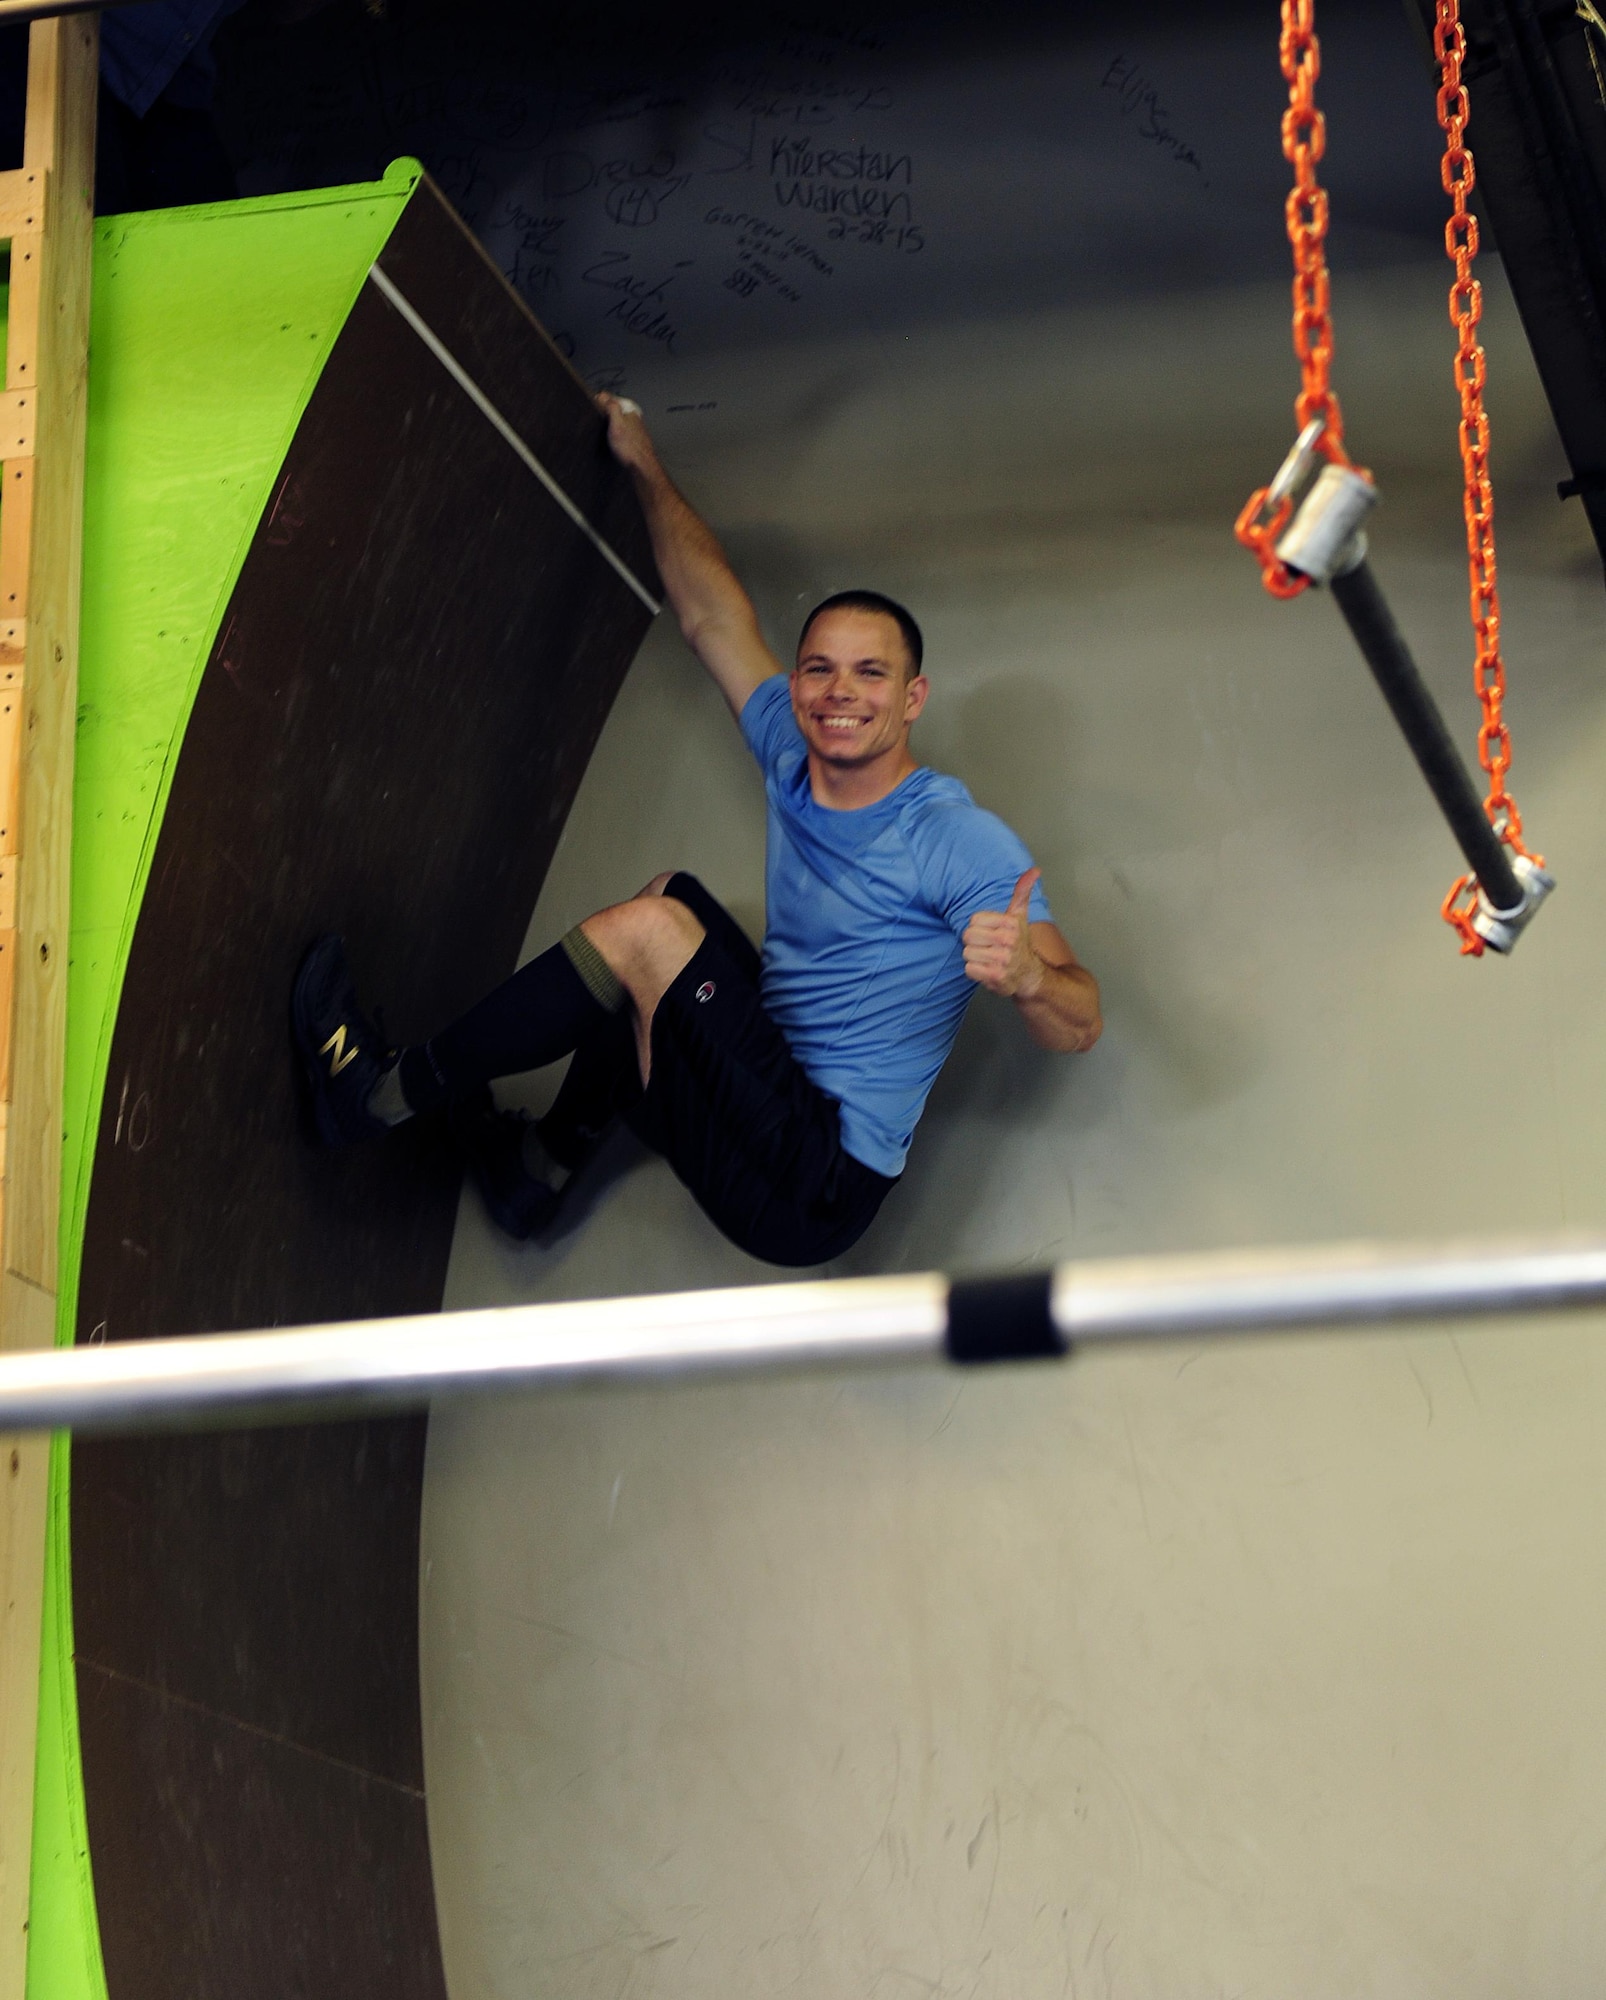 Staff Sgt. Randall Forsythe trains May 21, 2015, to compete on the TV show American Ninja Warrior. Forsythe, a 375th Civil Engineer Squadron firefighter, found out he was selected to represent the Air Force on a special military tribute episode. (U.S. Air Force photo/Staff Sgt. Stephenie Wade)